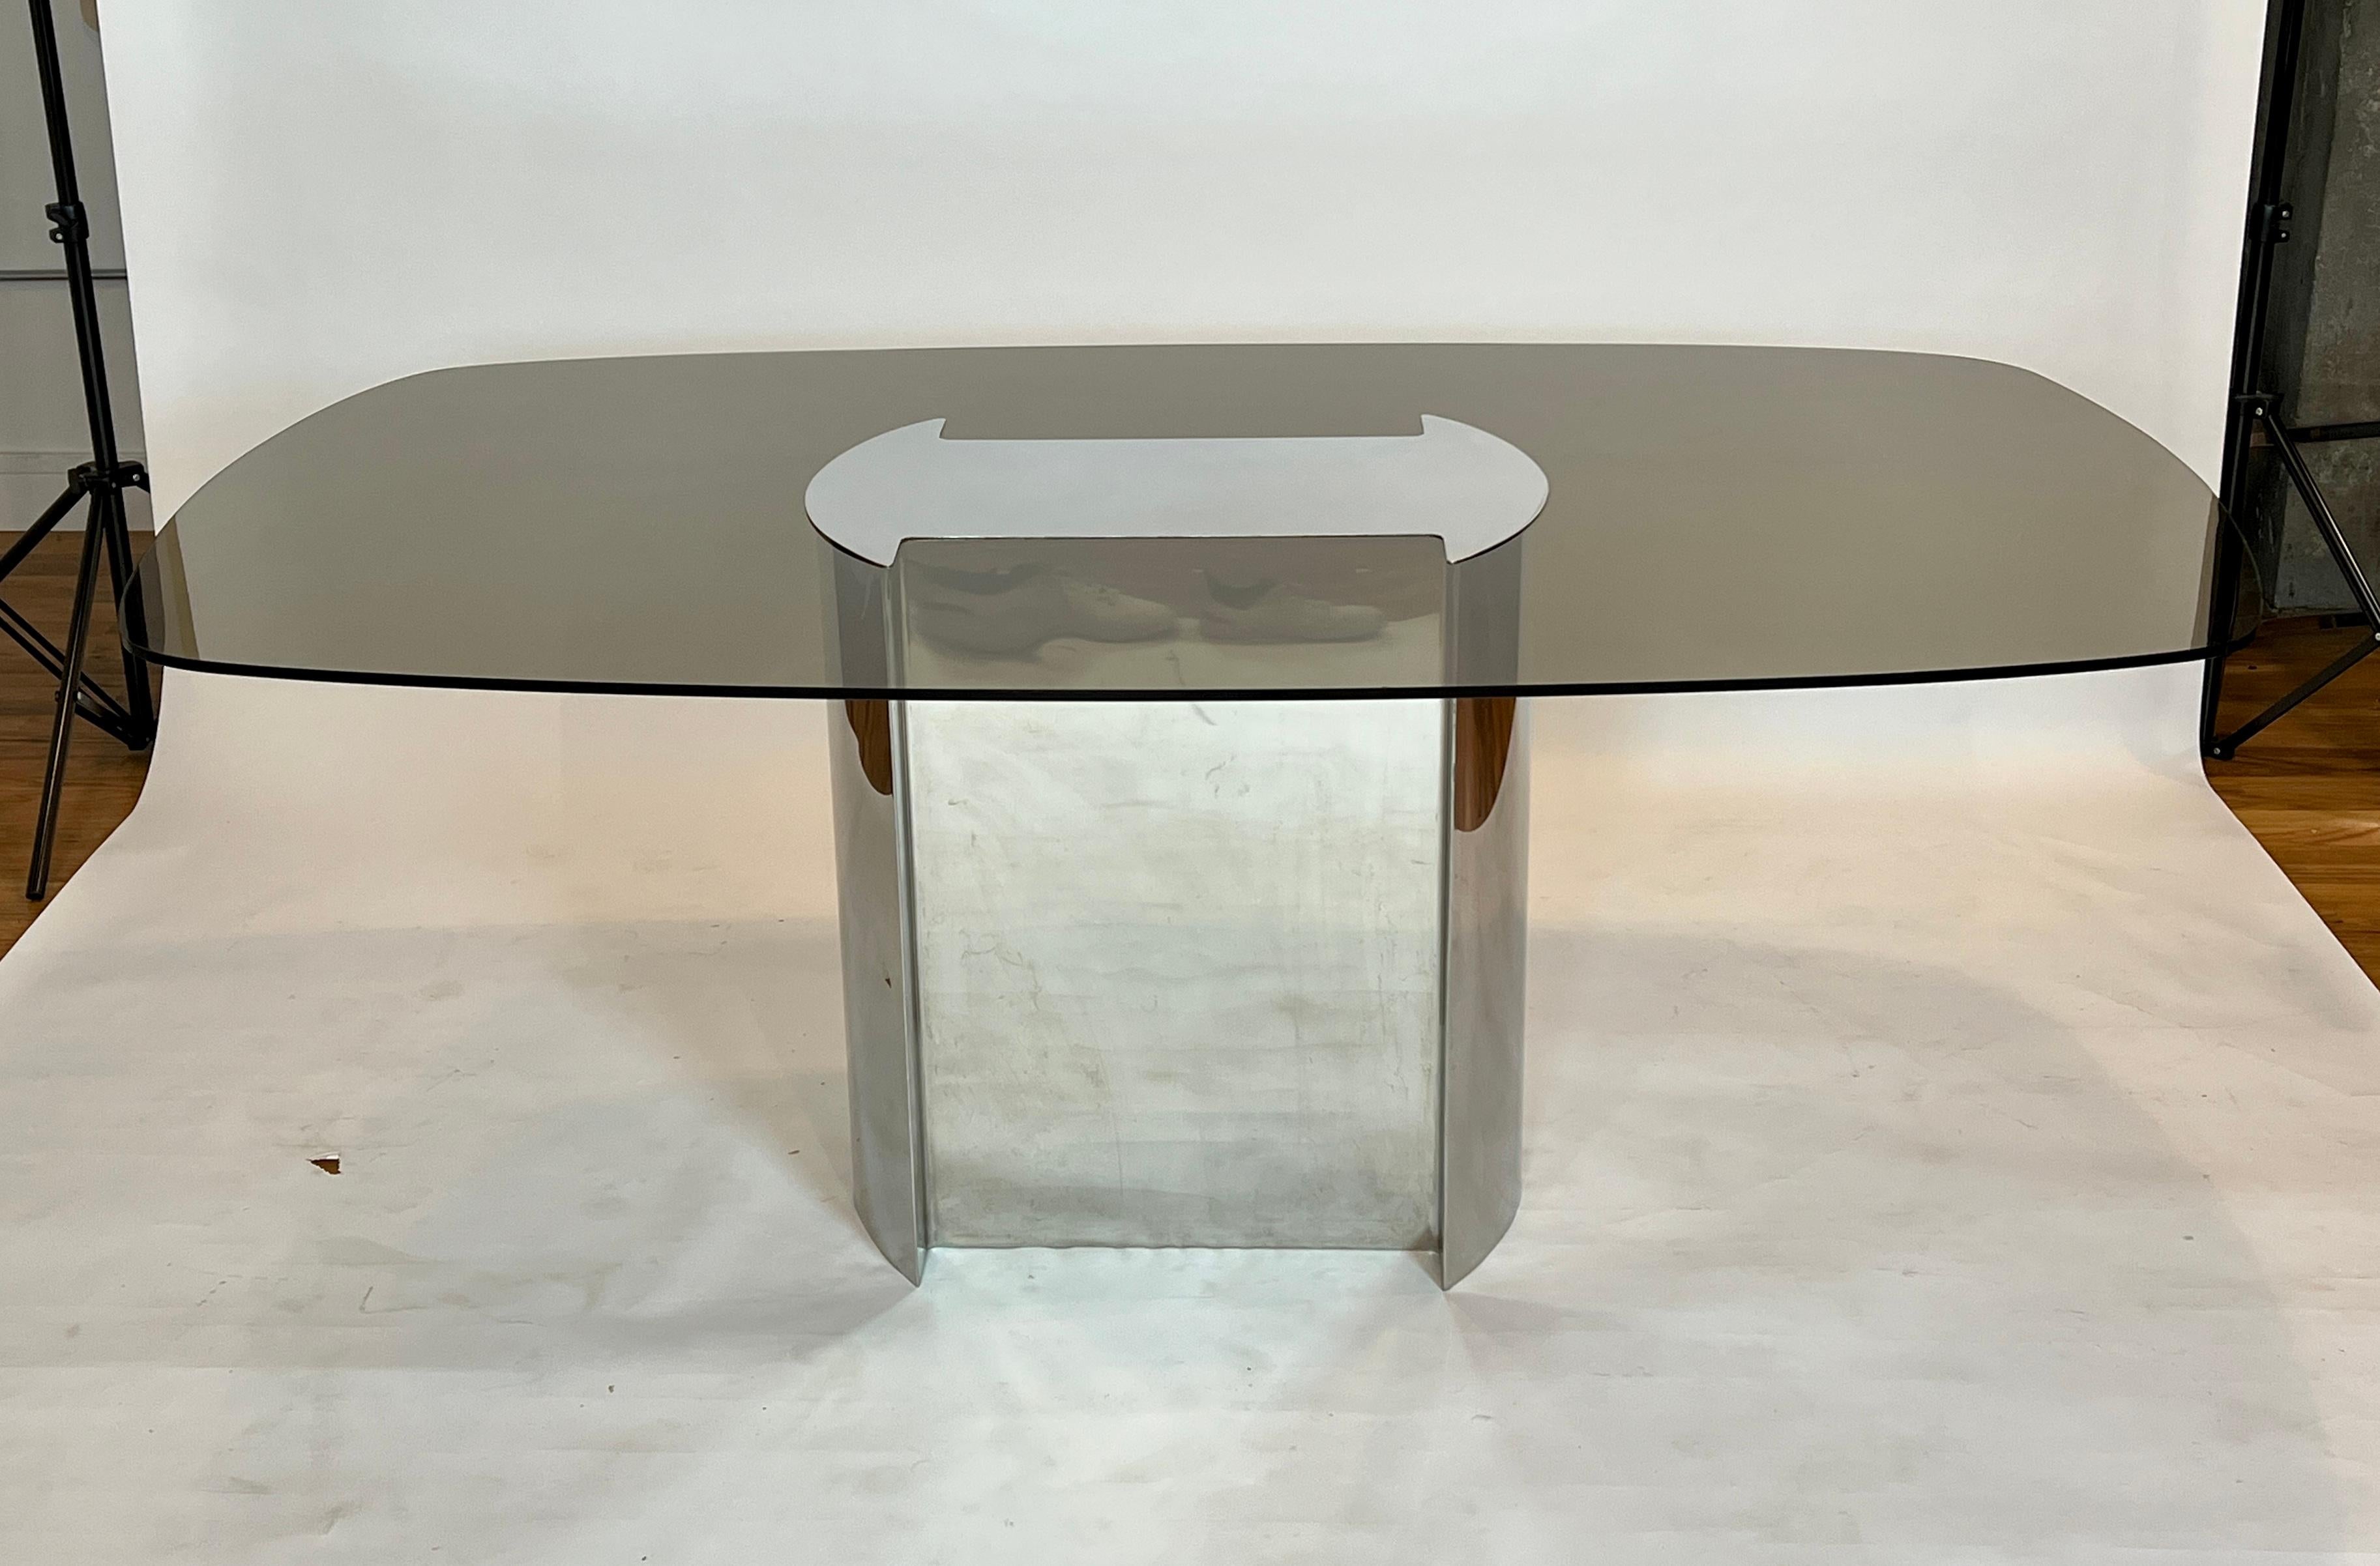 1970's dining table made of polished chrome base and runner top with smoked glass. The chrome top caps the glass affixing it to the base. This table was paired with the set of Willy Rizzo dining chairs pictured in the listing but we do not have a